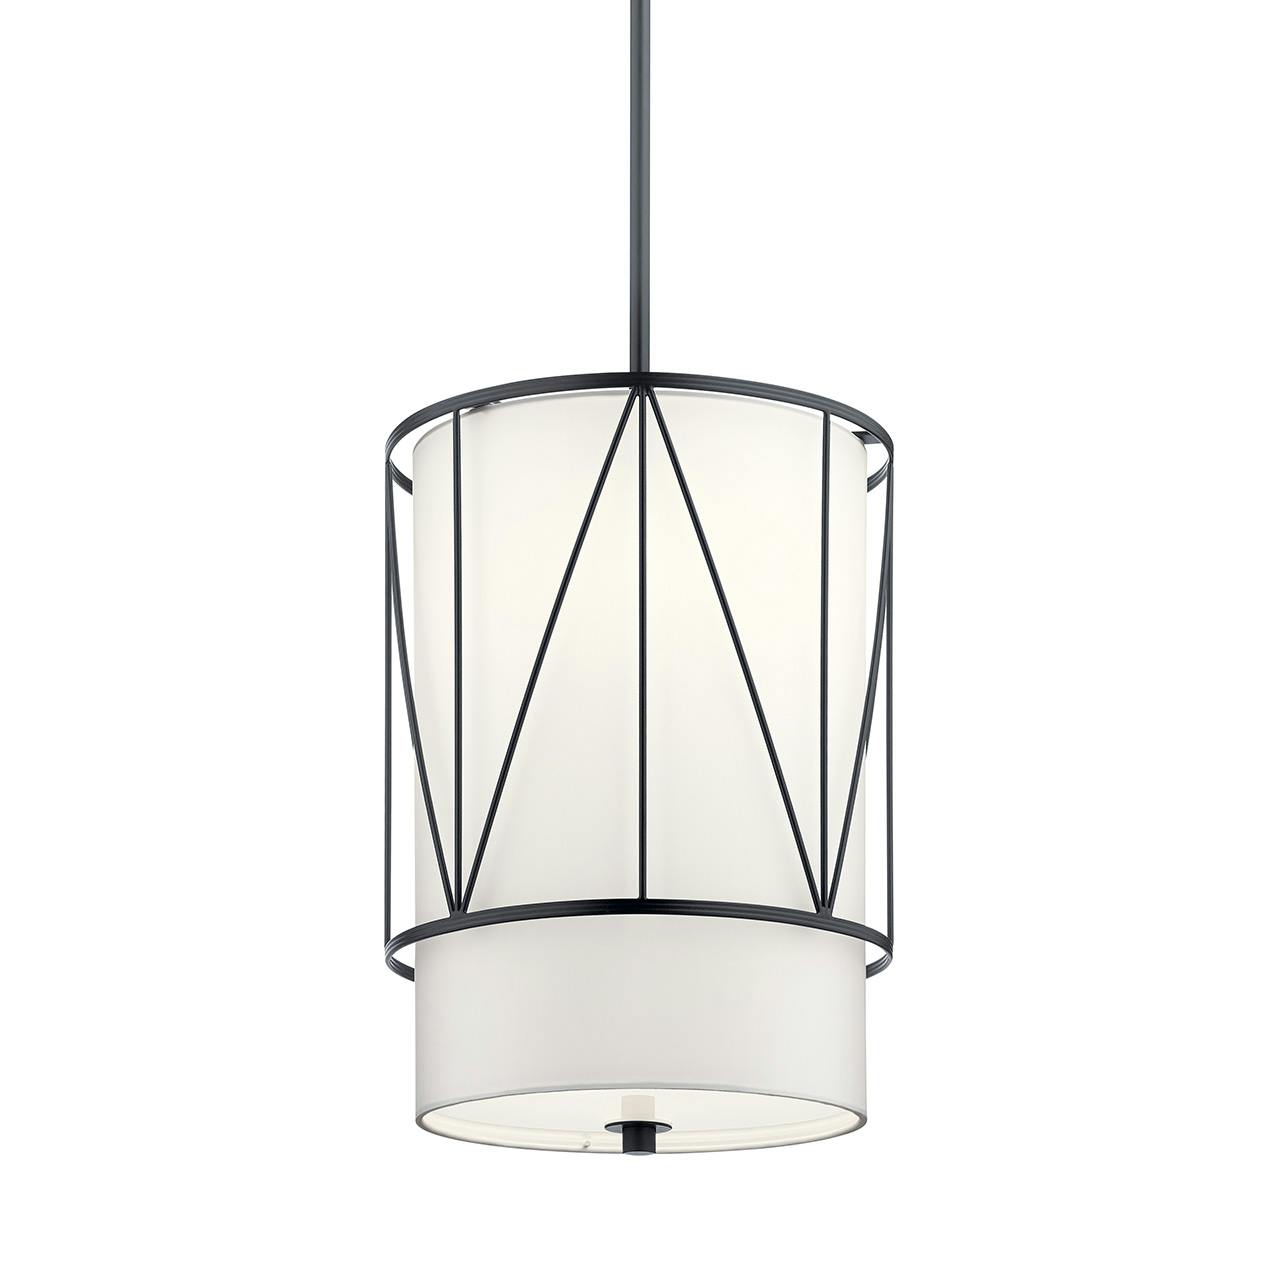 Birkleigh 1 Light Pendant Black without the canopy on a white background